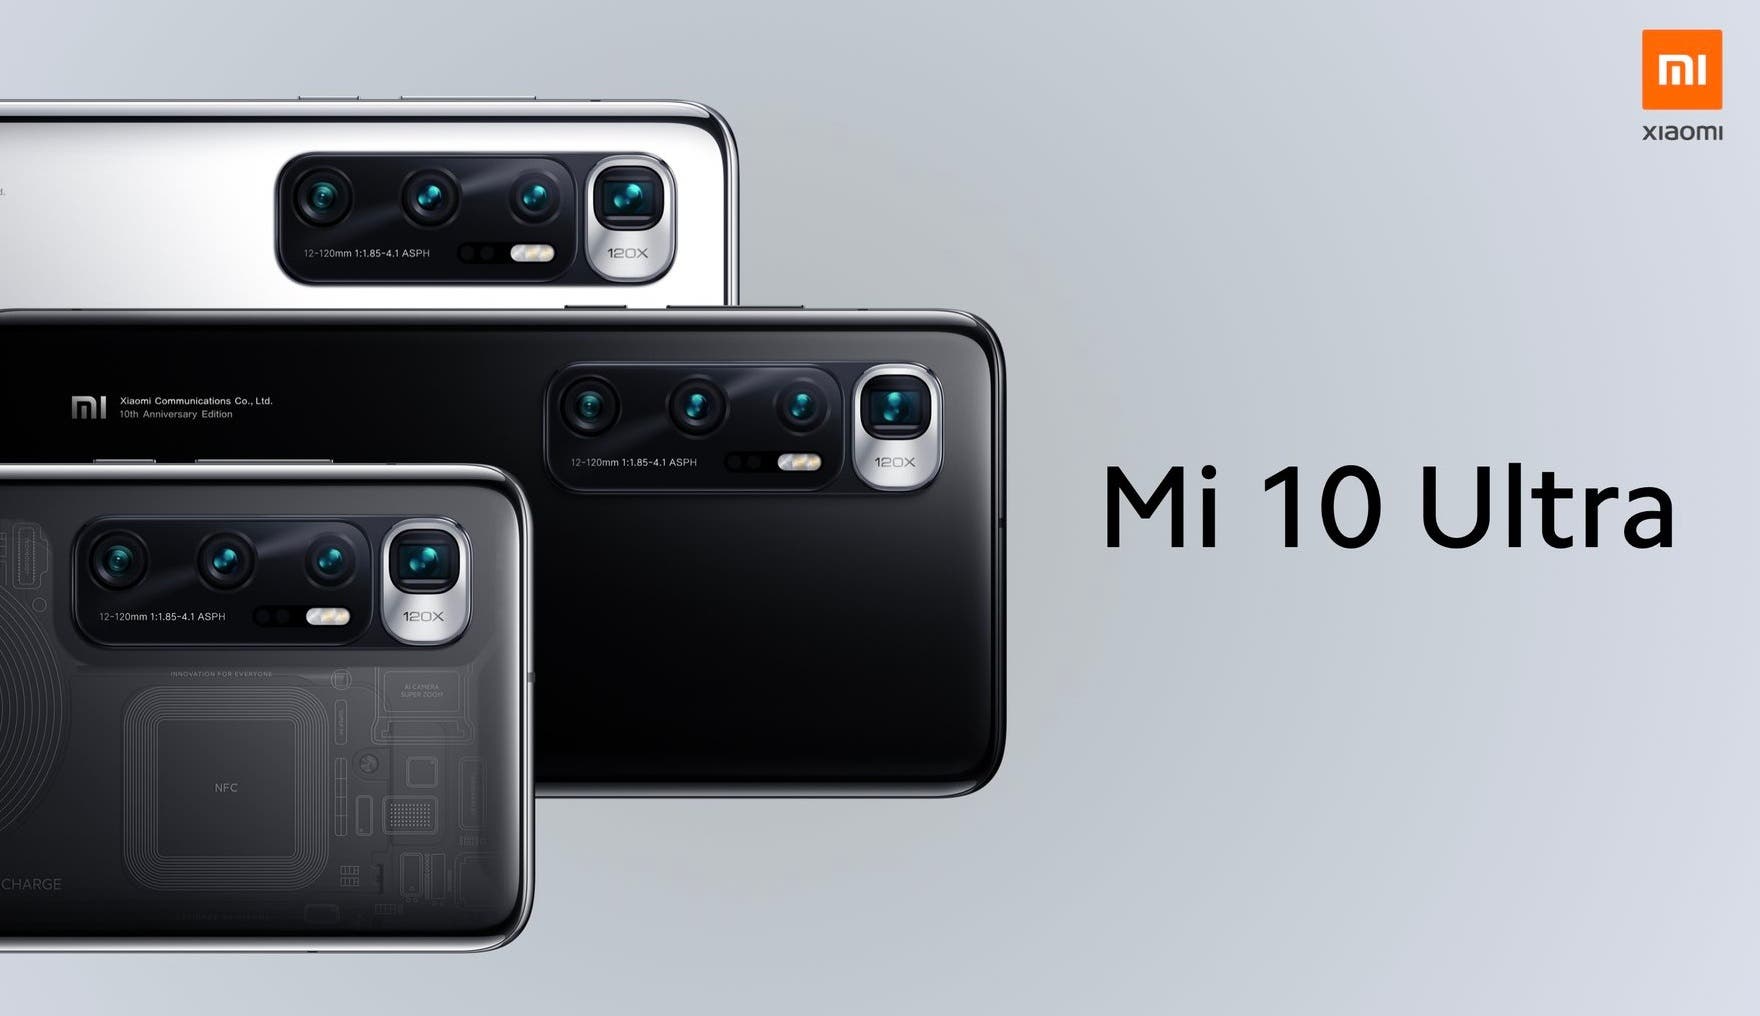 Xiaomi Mi 10 Ultra comes with 120mm optical tele, 120Hz display and more:  Digital Photography Review